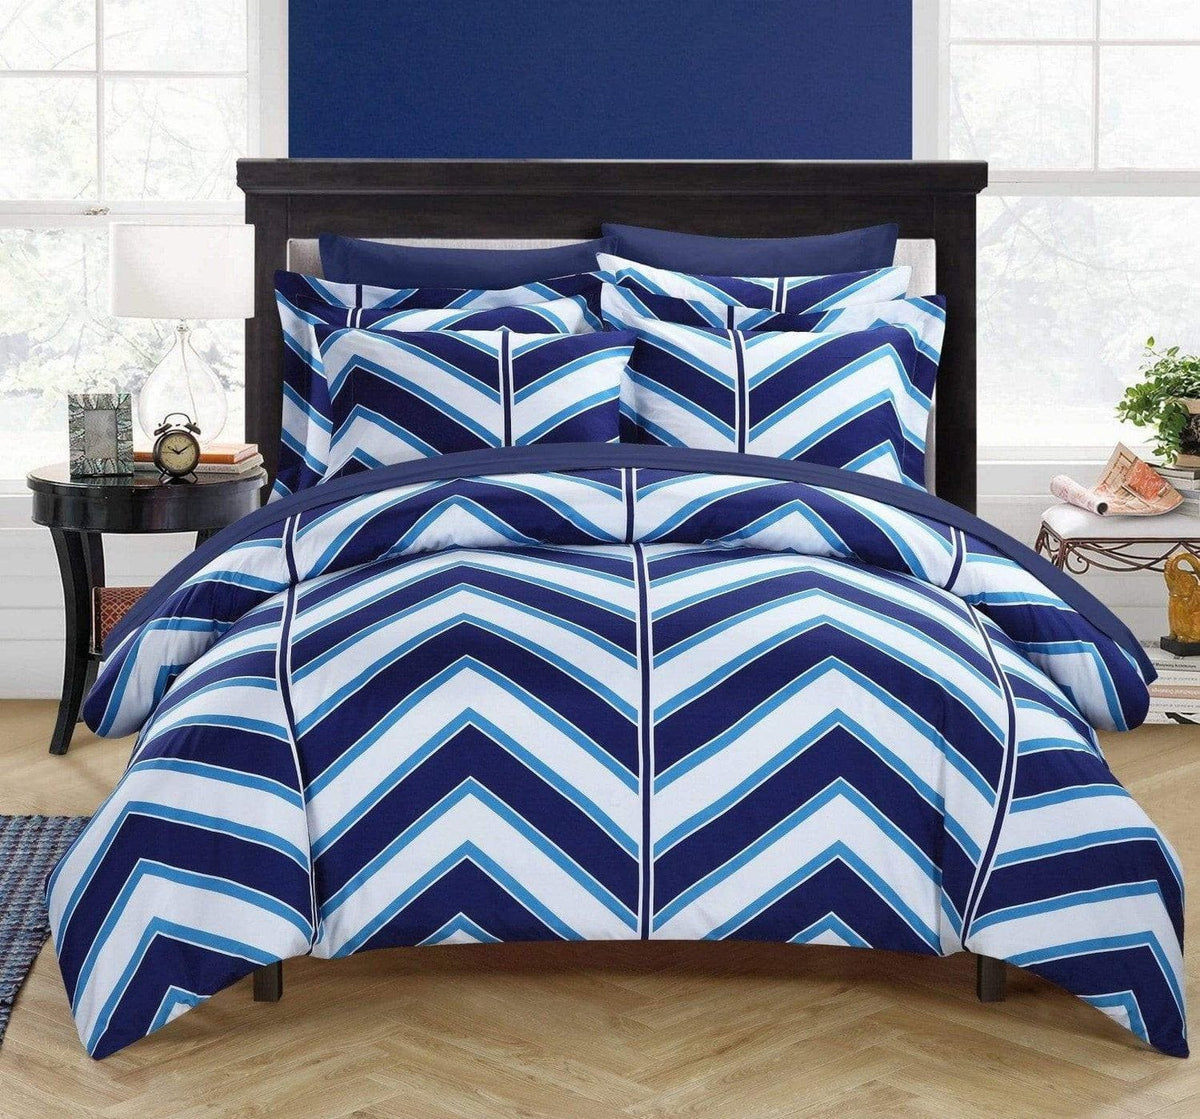 Chic Home Piper 9 Piece Reversible Duvet Cover Set Navy